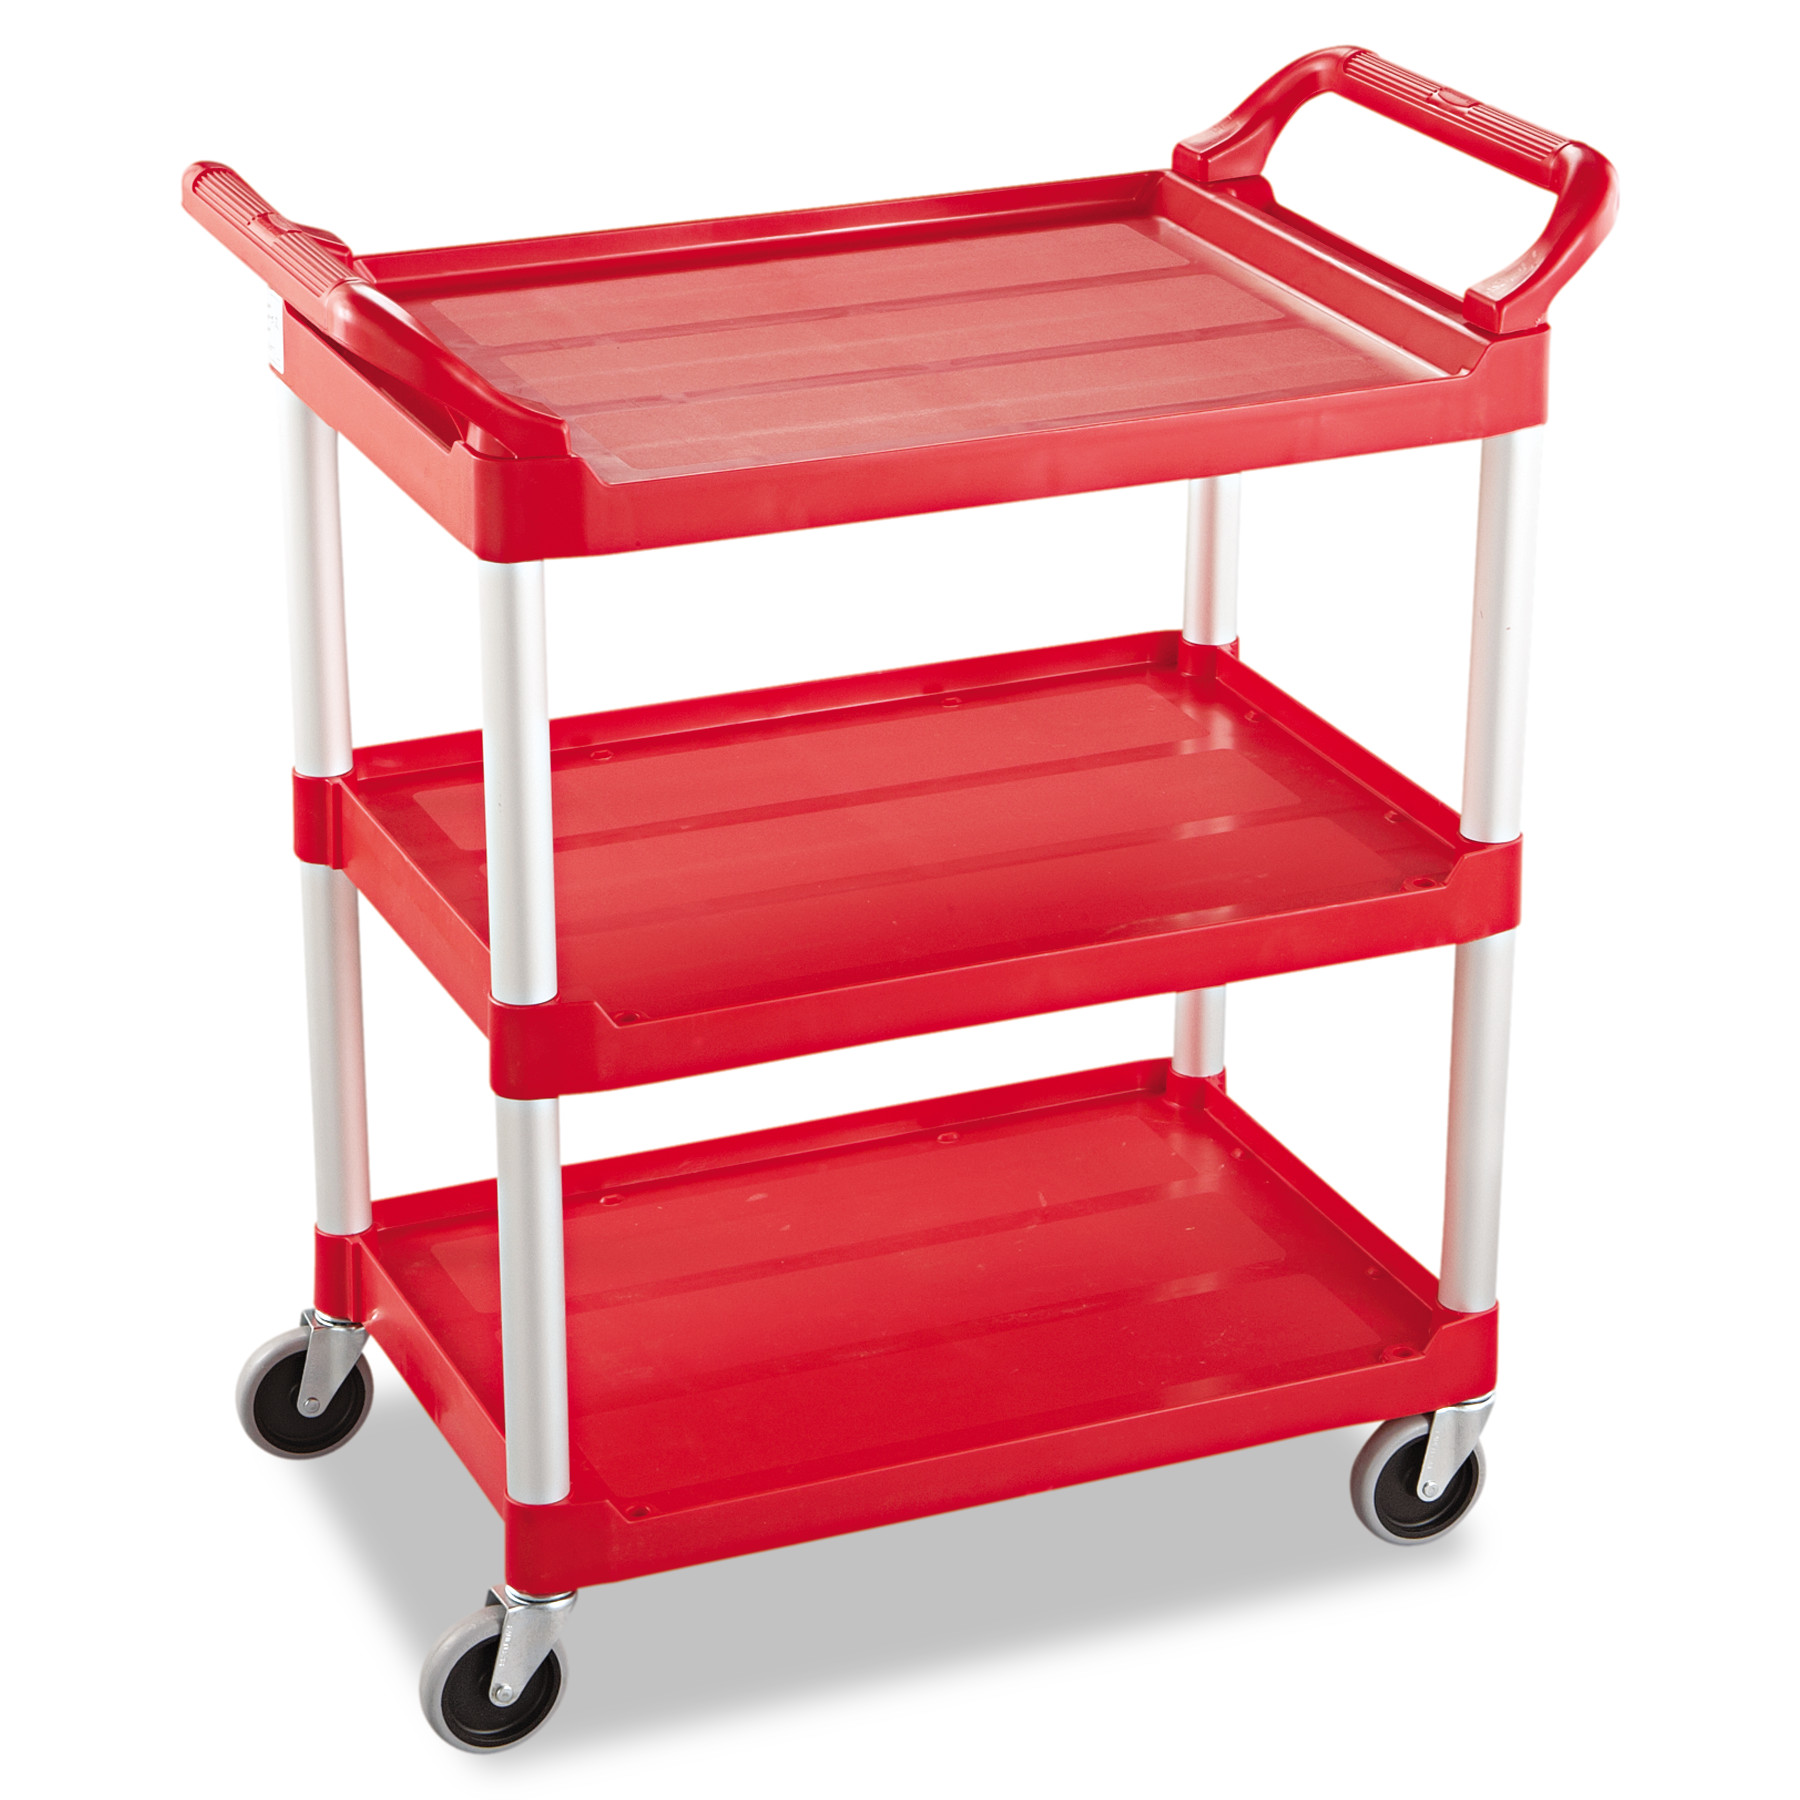 Rubbermaid Commercial Service Cart, 200-lb Capacity, Three-Shelf, 18.63w x 33.63d x 37.75h, Red -RCP342488RED - image 1 of 3